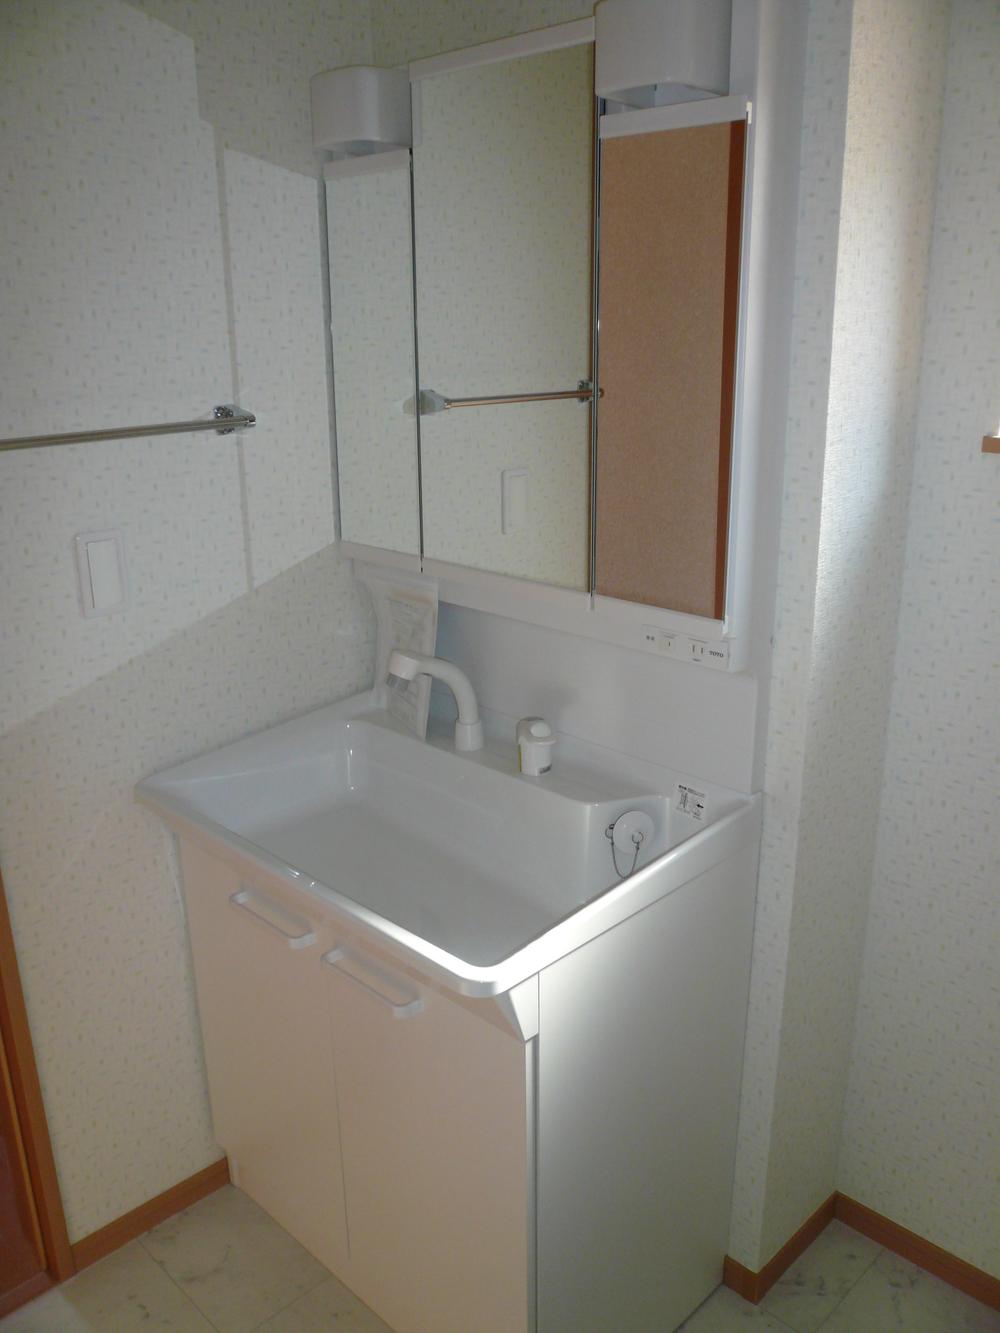 Wash basin, toilet. Wash room with cleanliness! Of course, it is easy to use shower plug! !